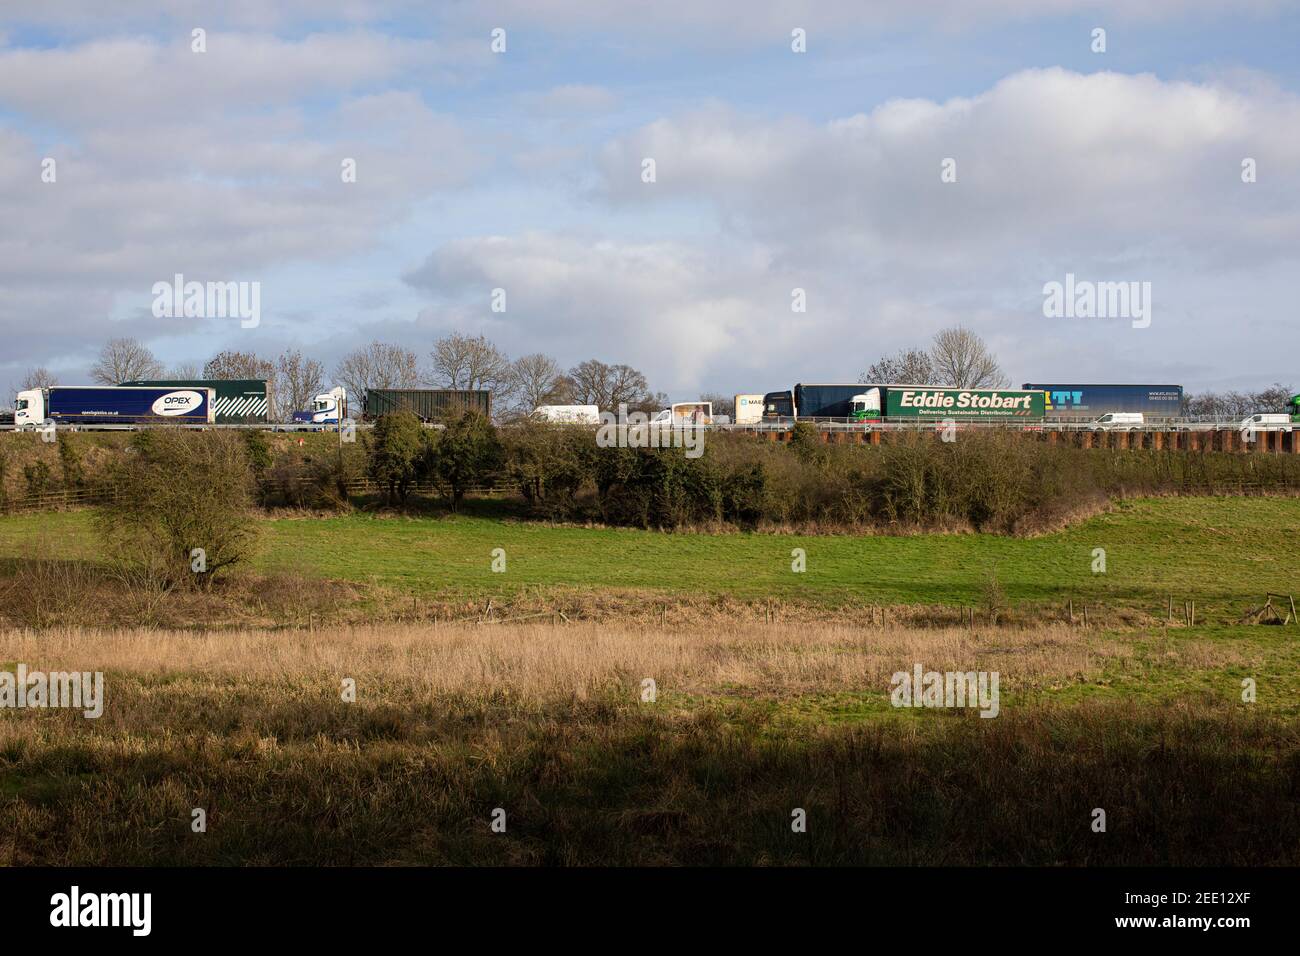 Stationary heavy goods vehicles in traffic jams on the M6 motorway in Staffordshire Stock Photo